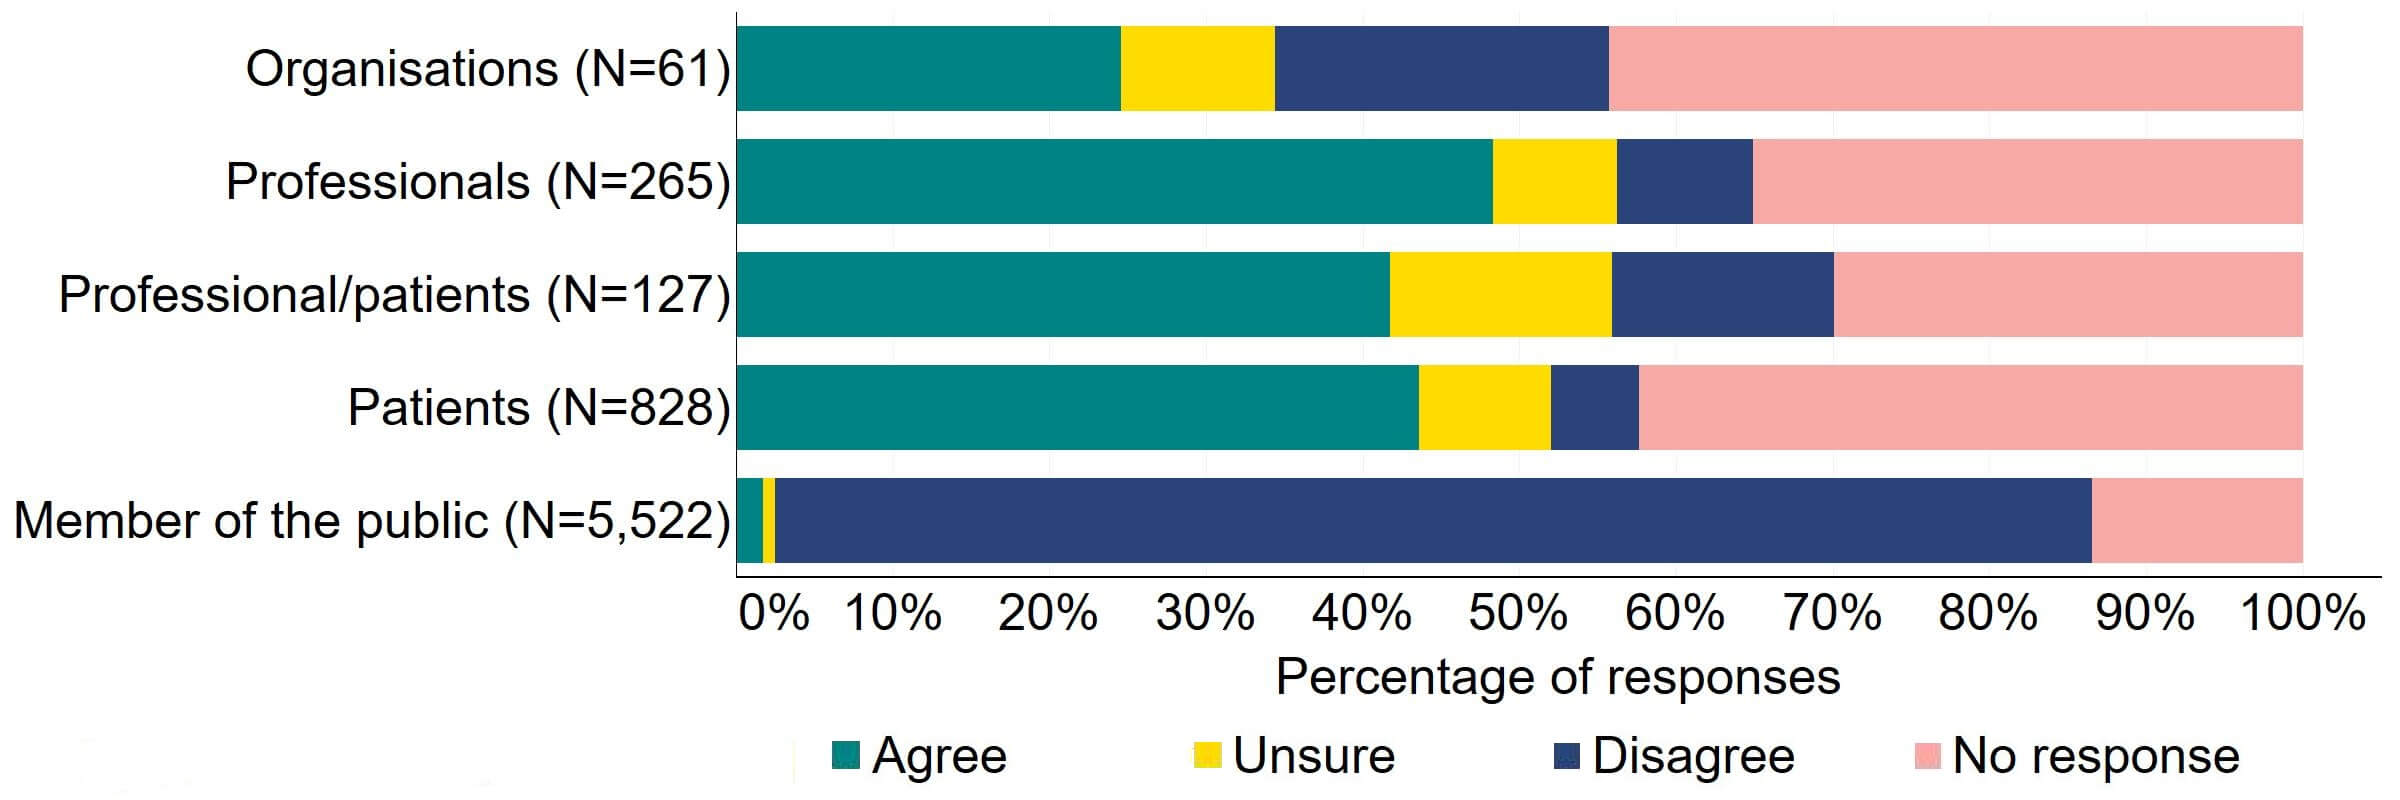 Figure 18 is a stacked bar chart showing the proportion of respondents in each response group who agreed, disagreed, were unsure, or who did not provide a response to the proposal. The underlying data can be downloaded as an Excel worksheet at the top of the page.